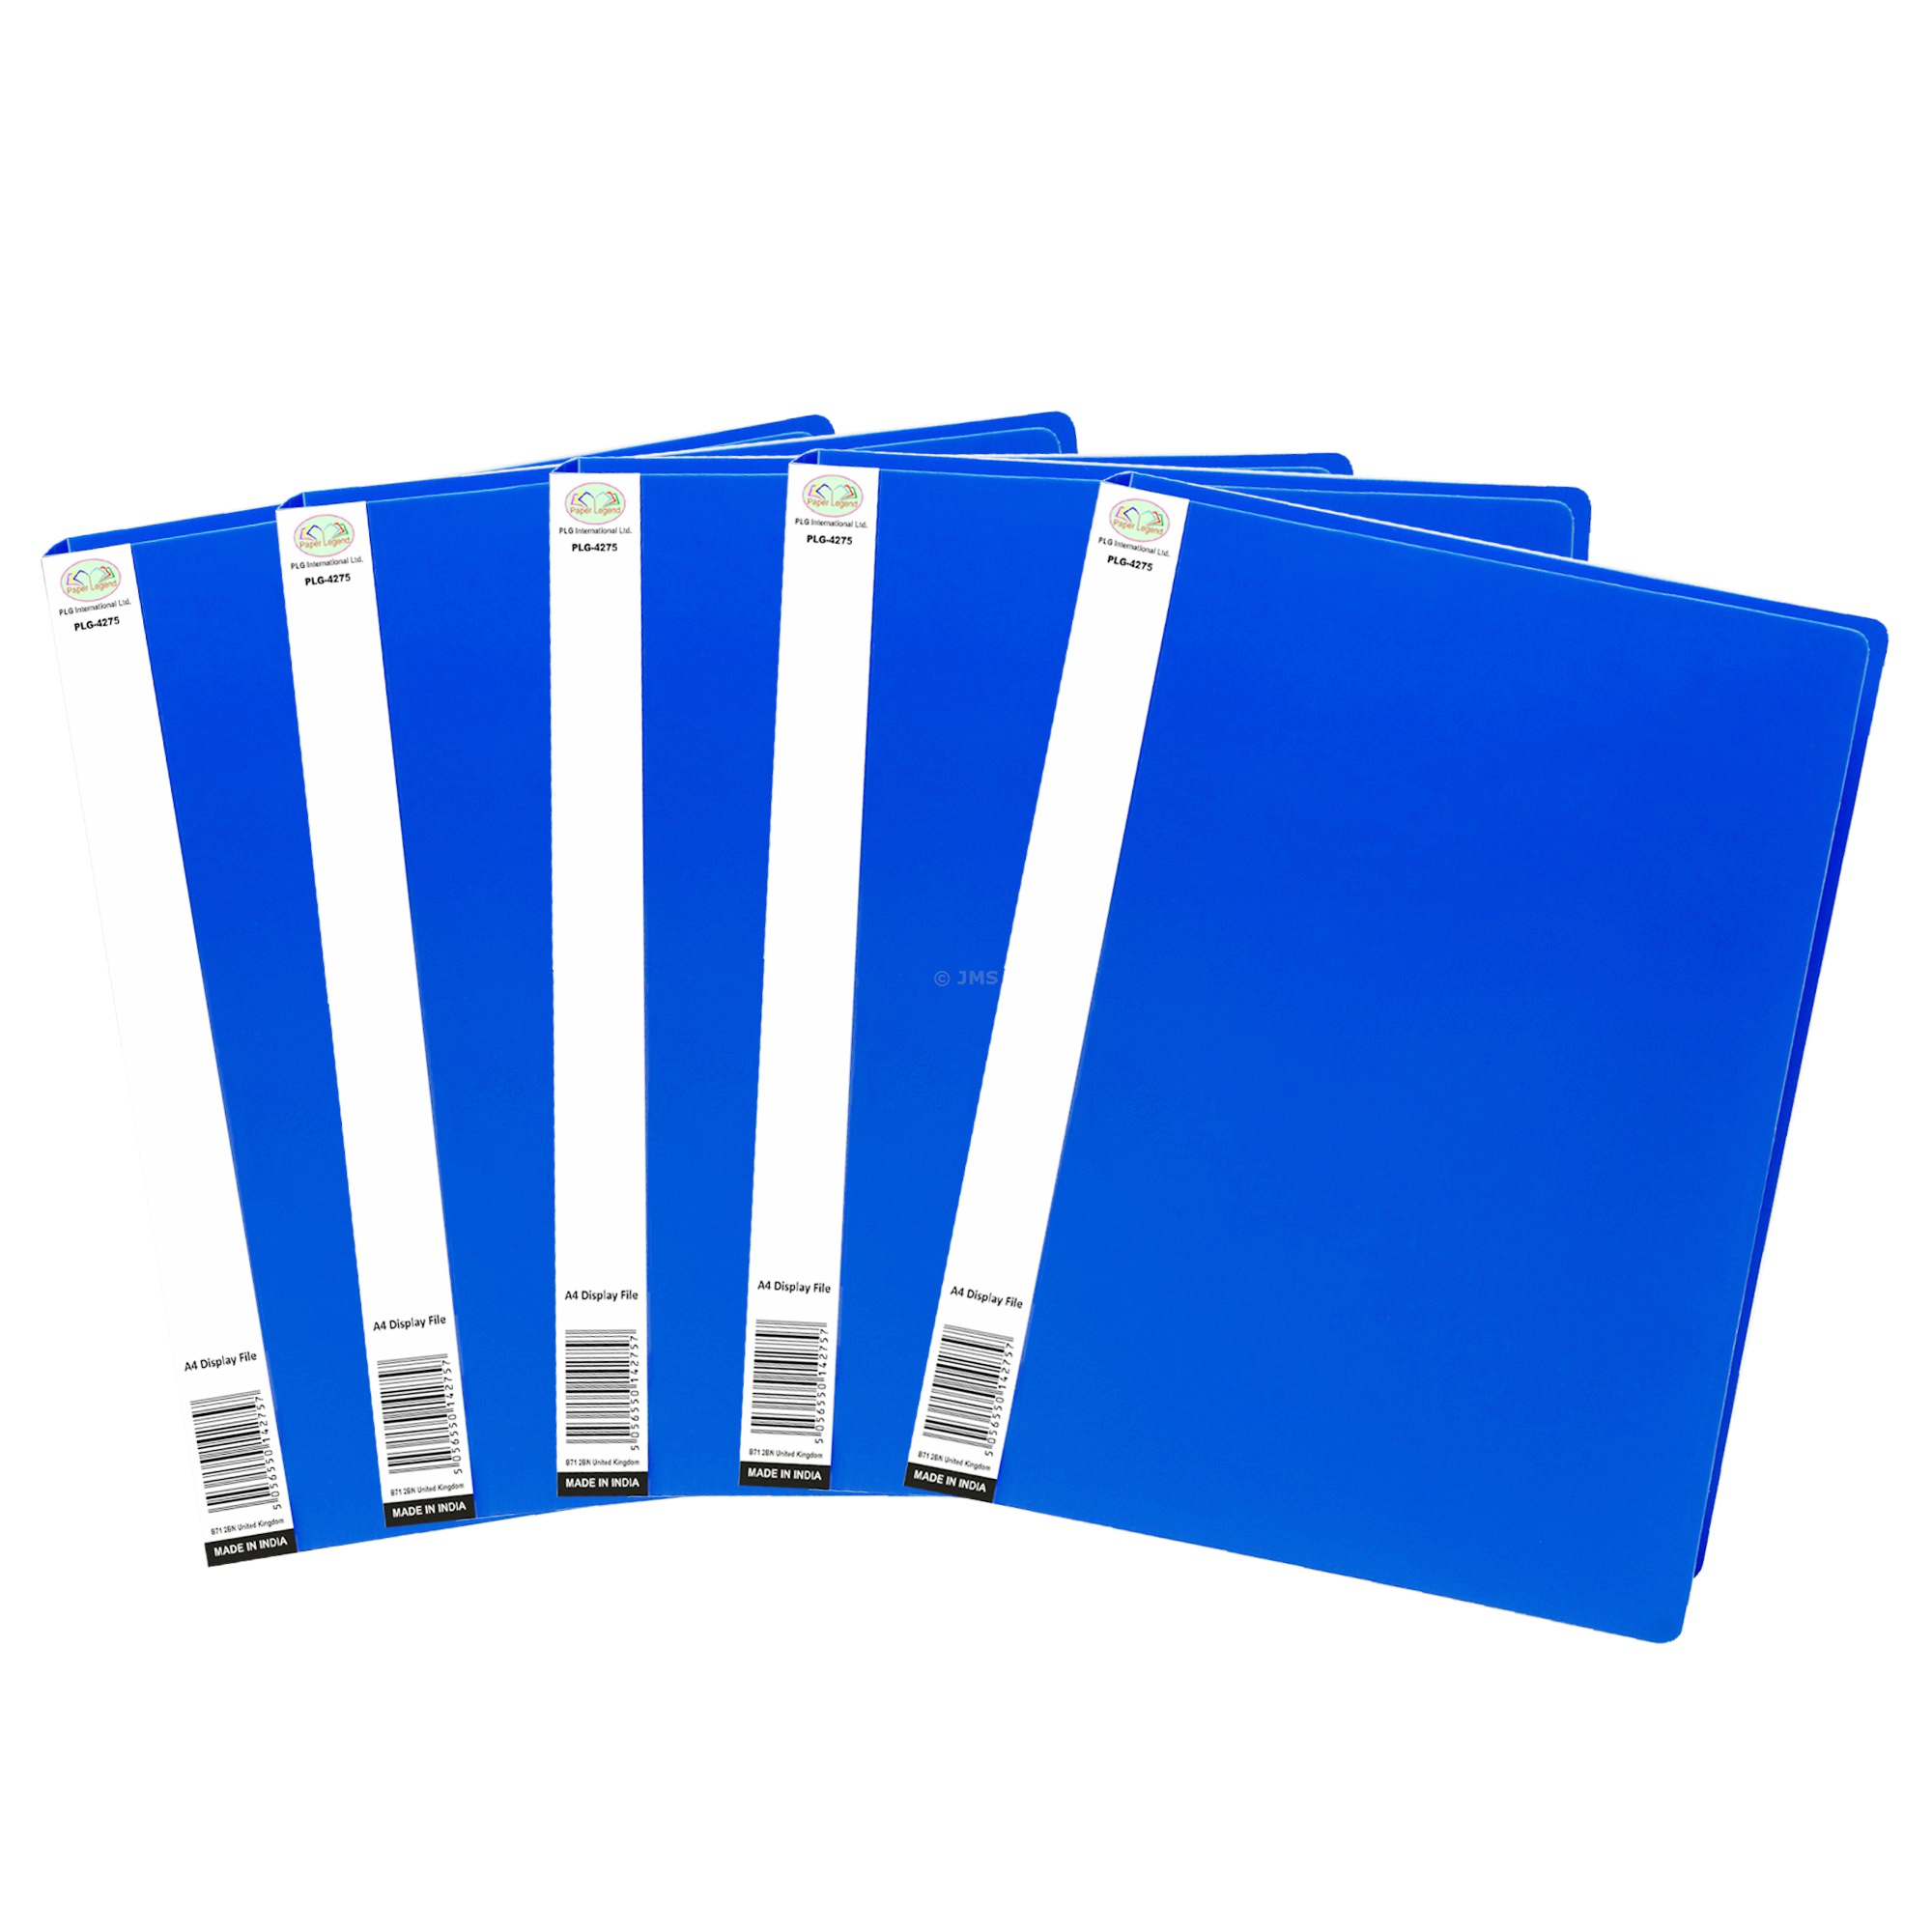 [Box of 50] A4 Display File Blue 20 Pockets (40 View) Portfolio Project Presentation Report Files Book Home School Office